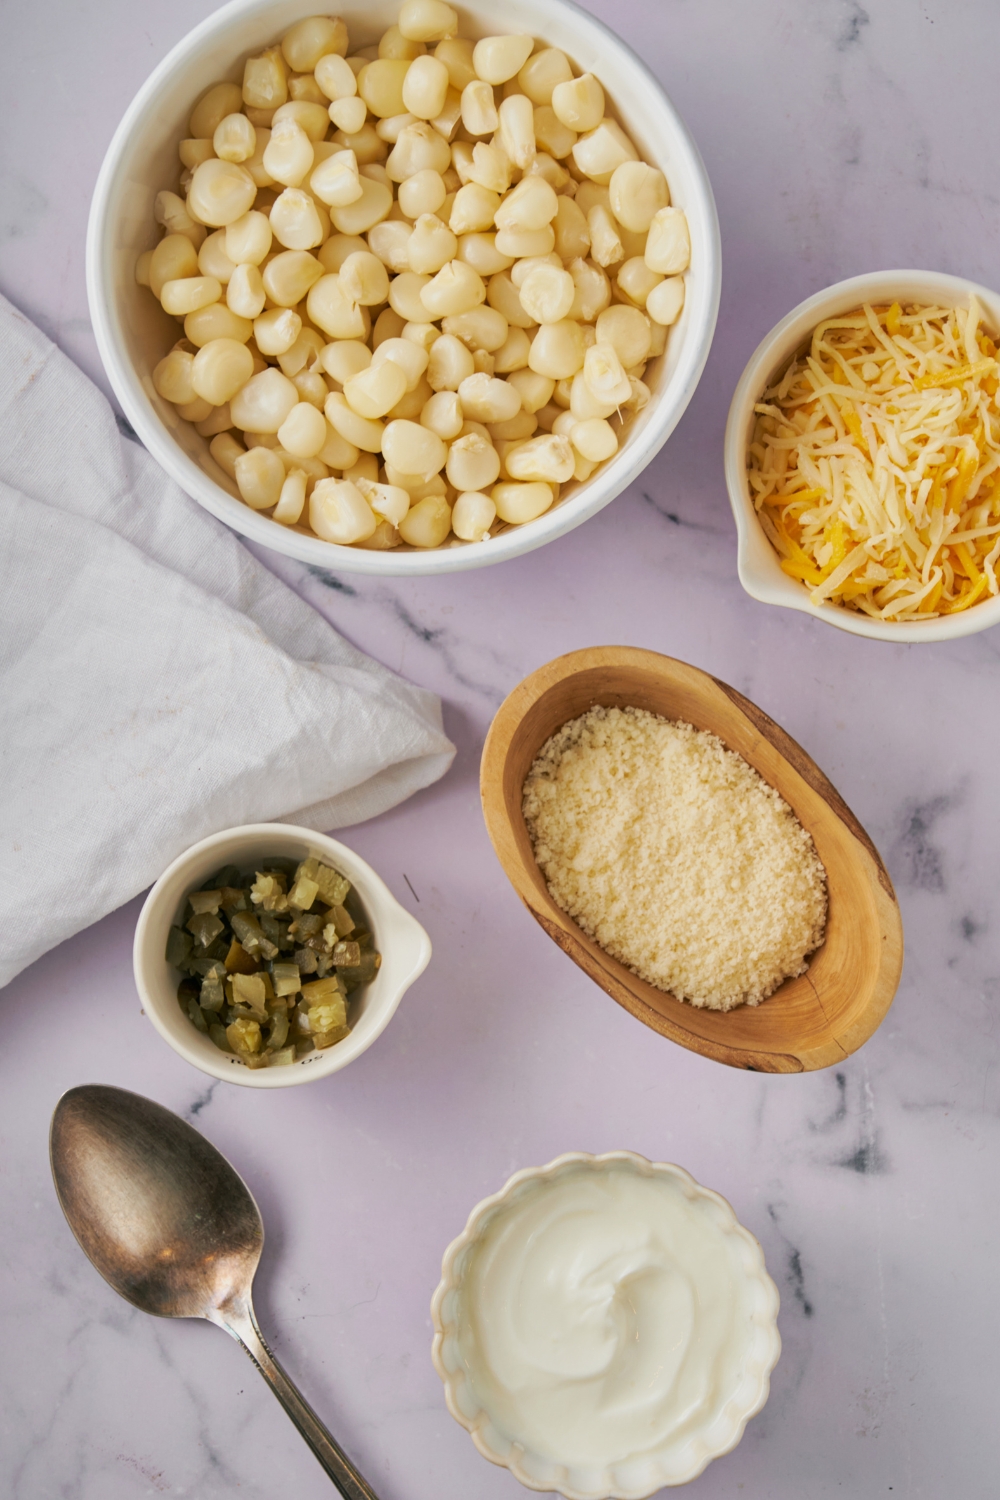 Hominy, jalapenos, shredded cheeses in separate bowls on a marble countertop